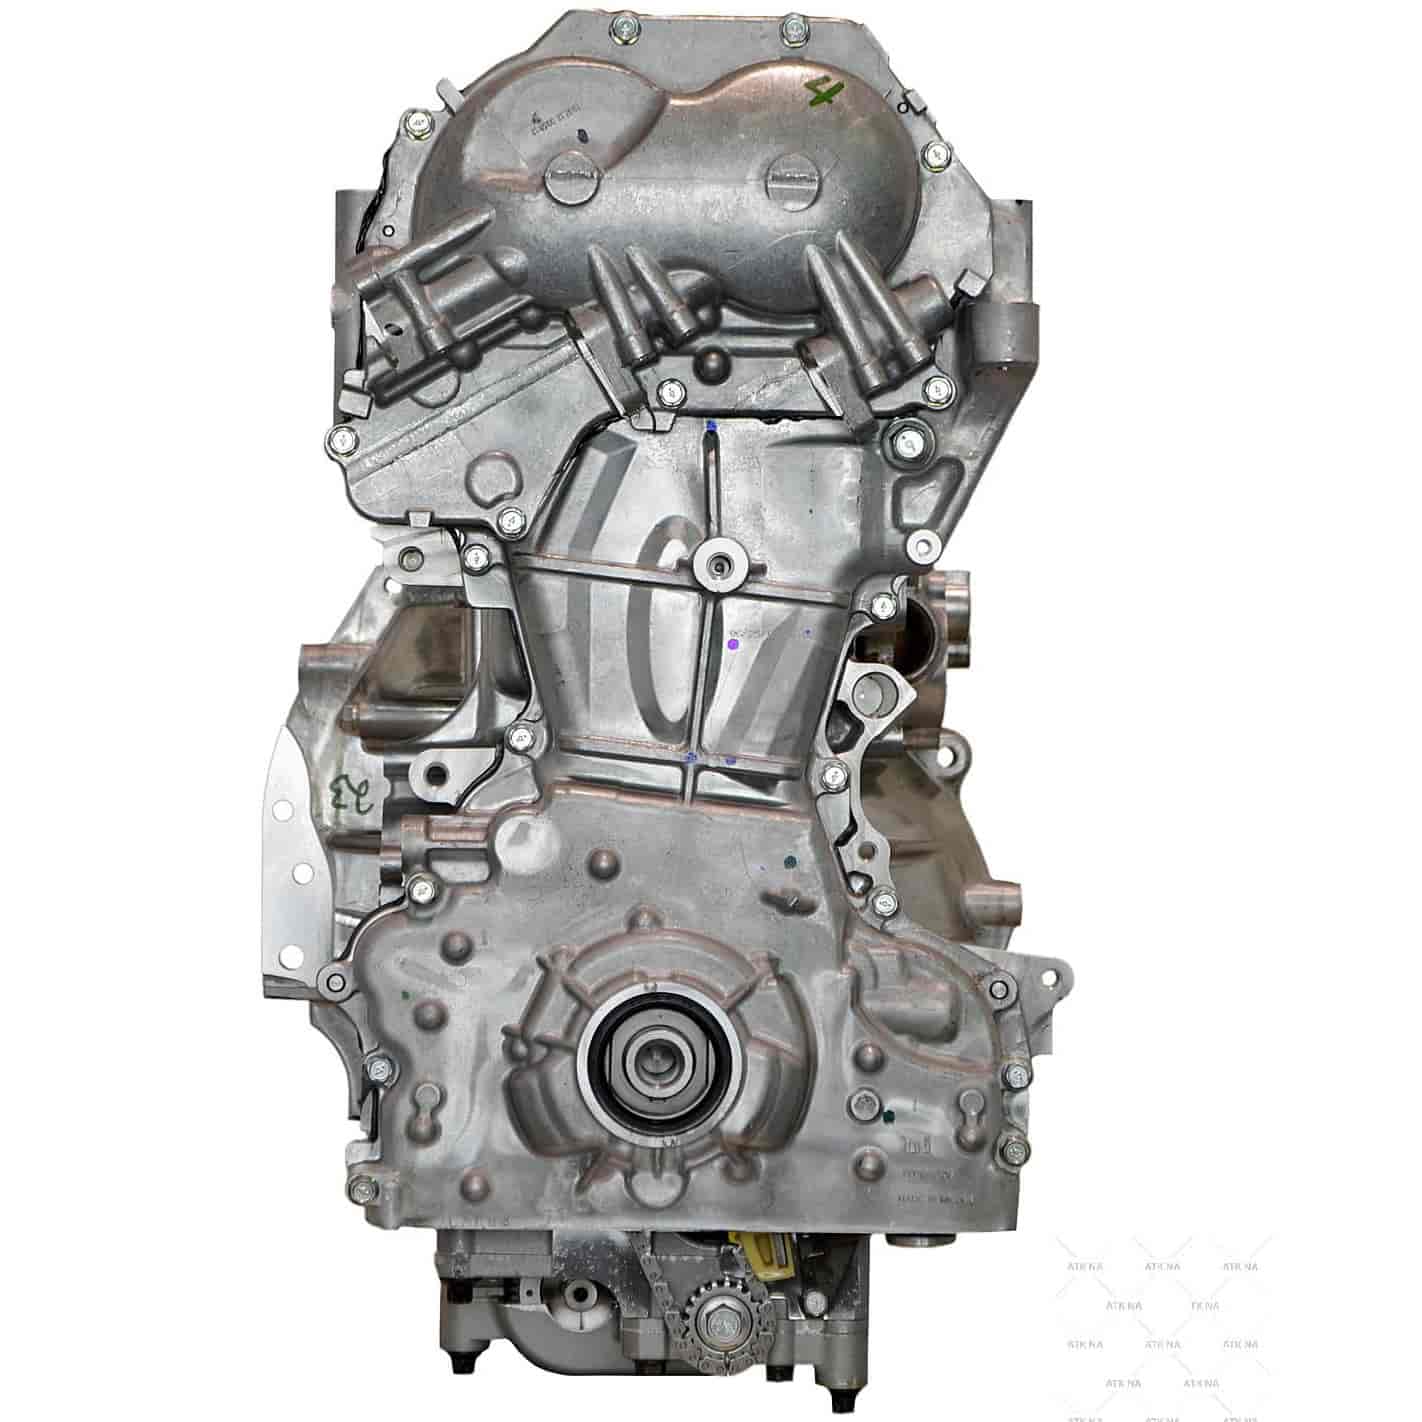 Remanufactured Crate Engine for 2012-2018 fits Nissan Altima & Rogoue with 2.5L L4 QR25DE